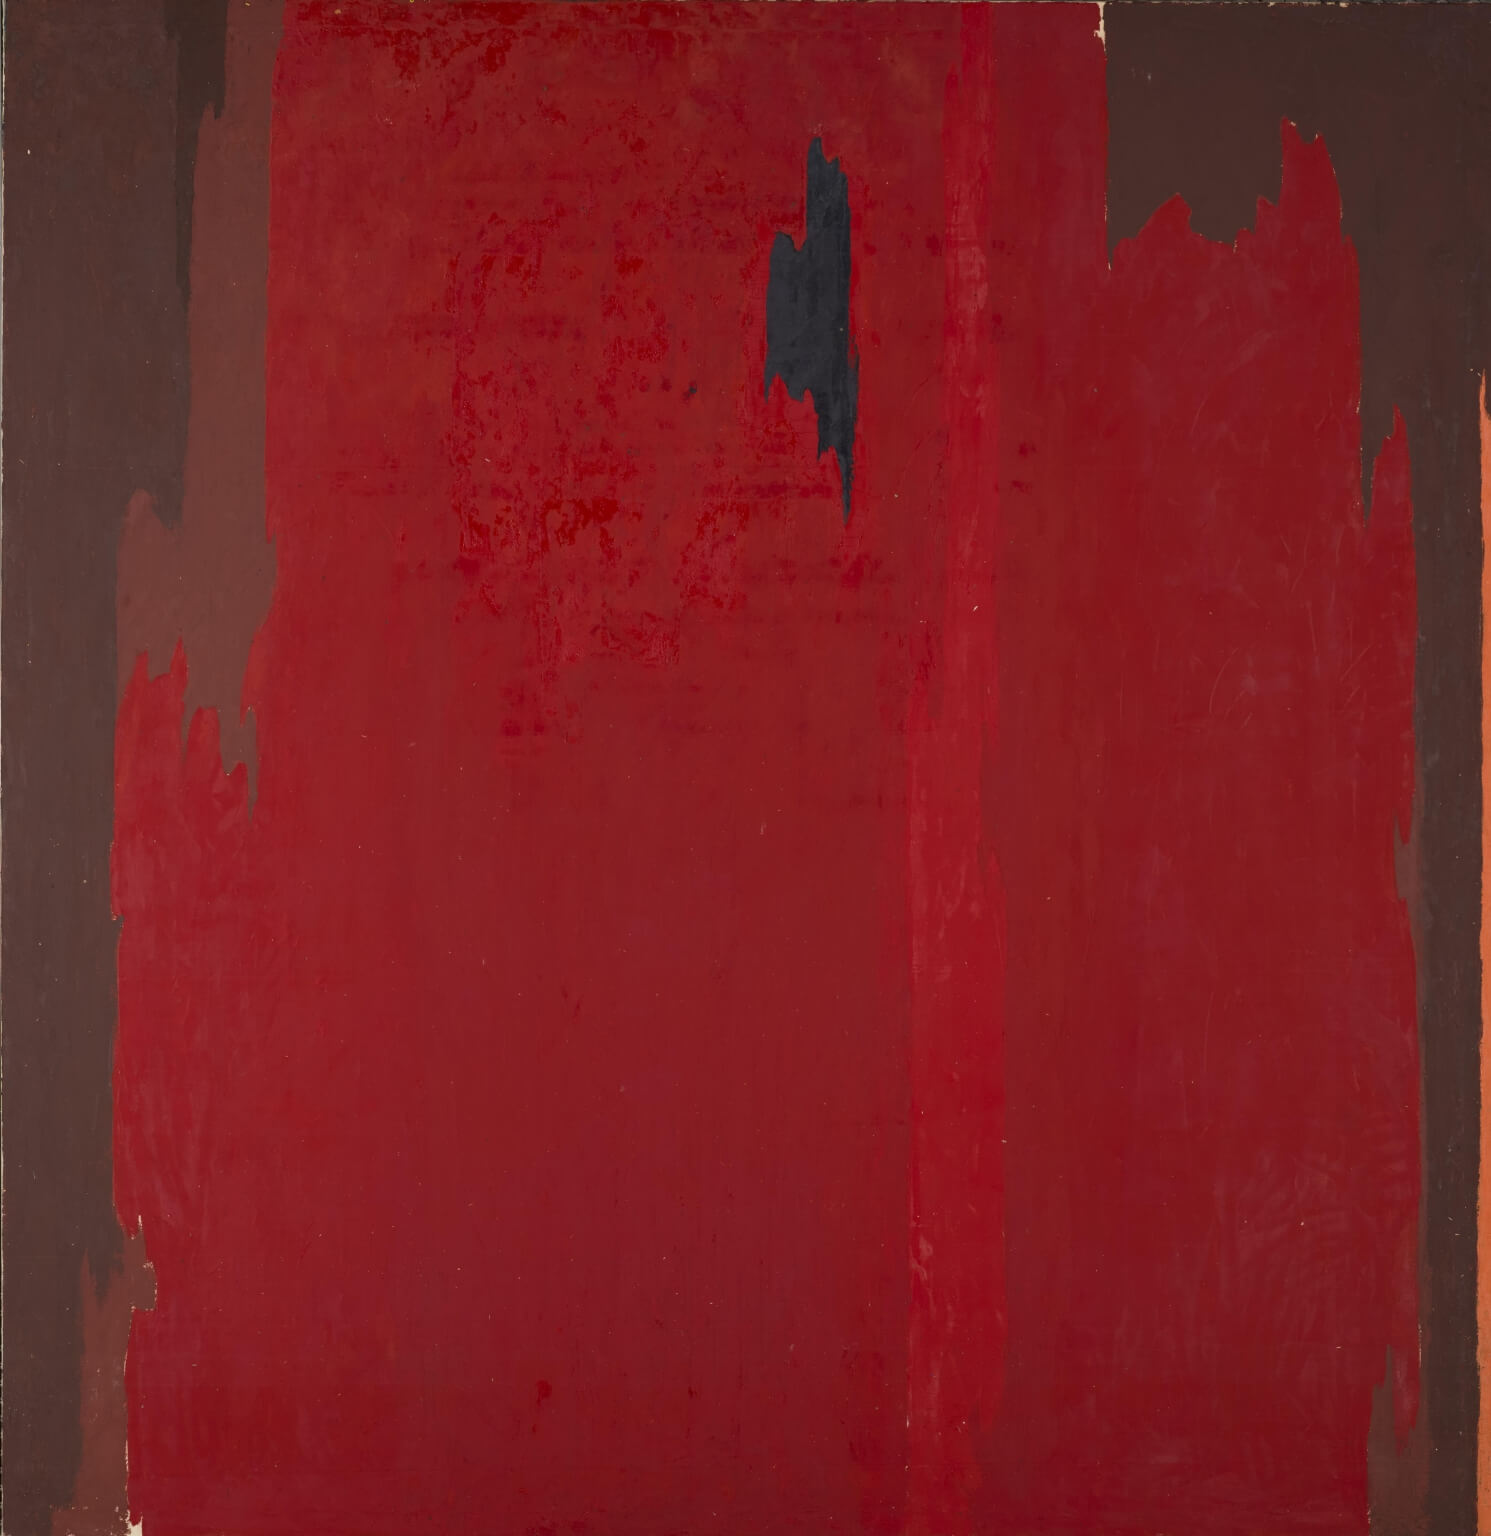 Abstract painting covered mostly in red with several shades of red including a lighter red line up the center, brown around the edges, and a black splotch toward the top center